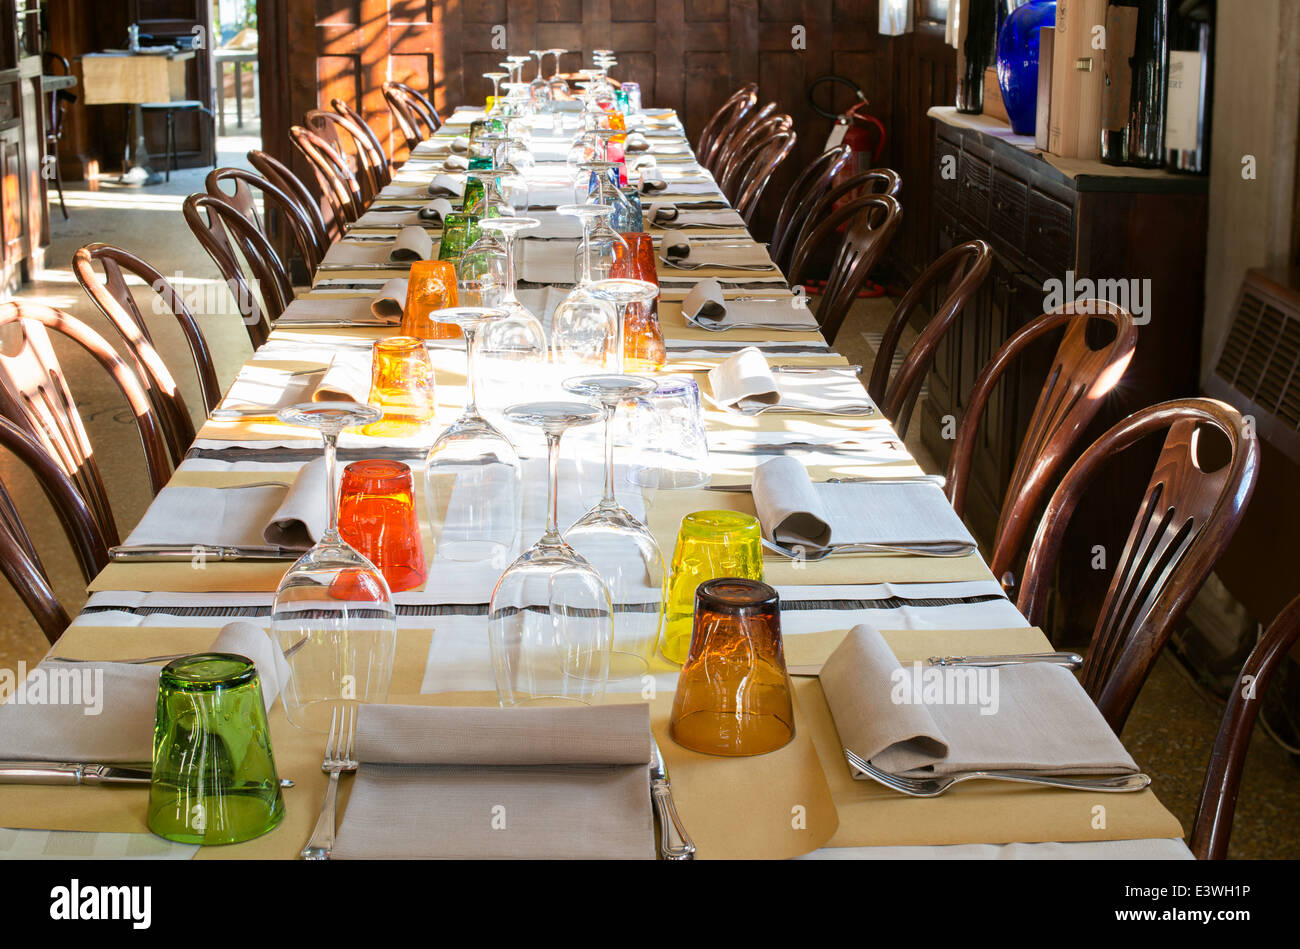 Table in an Italian restaurant. Wooden antique furniture Stock Photo